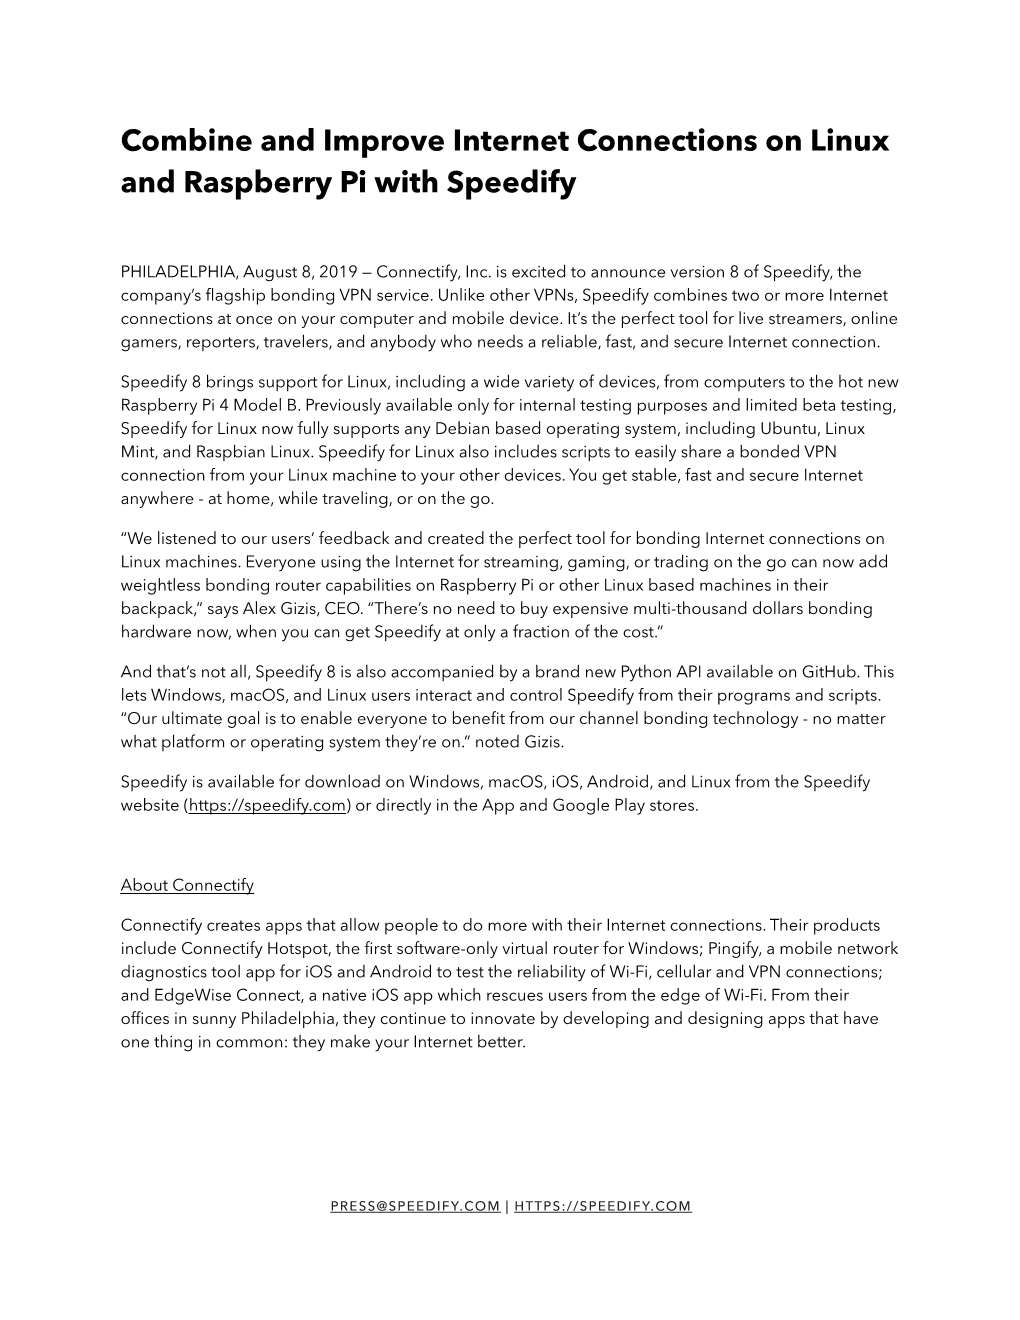 Combine and Improve Internet Connections on Linux and Raspberry Pi with Speedify